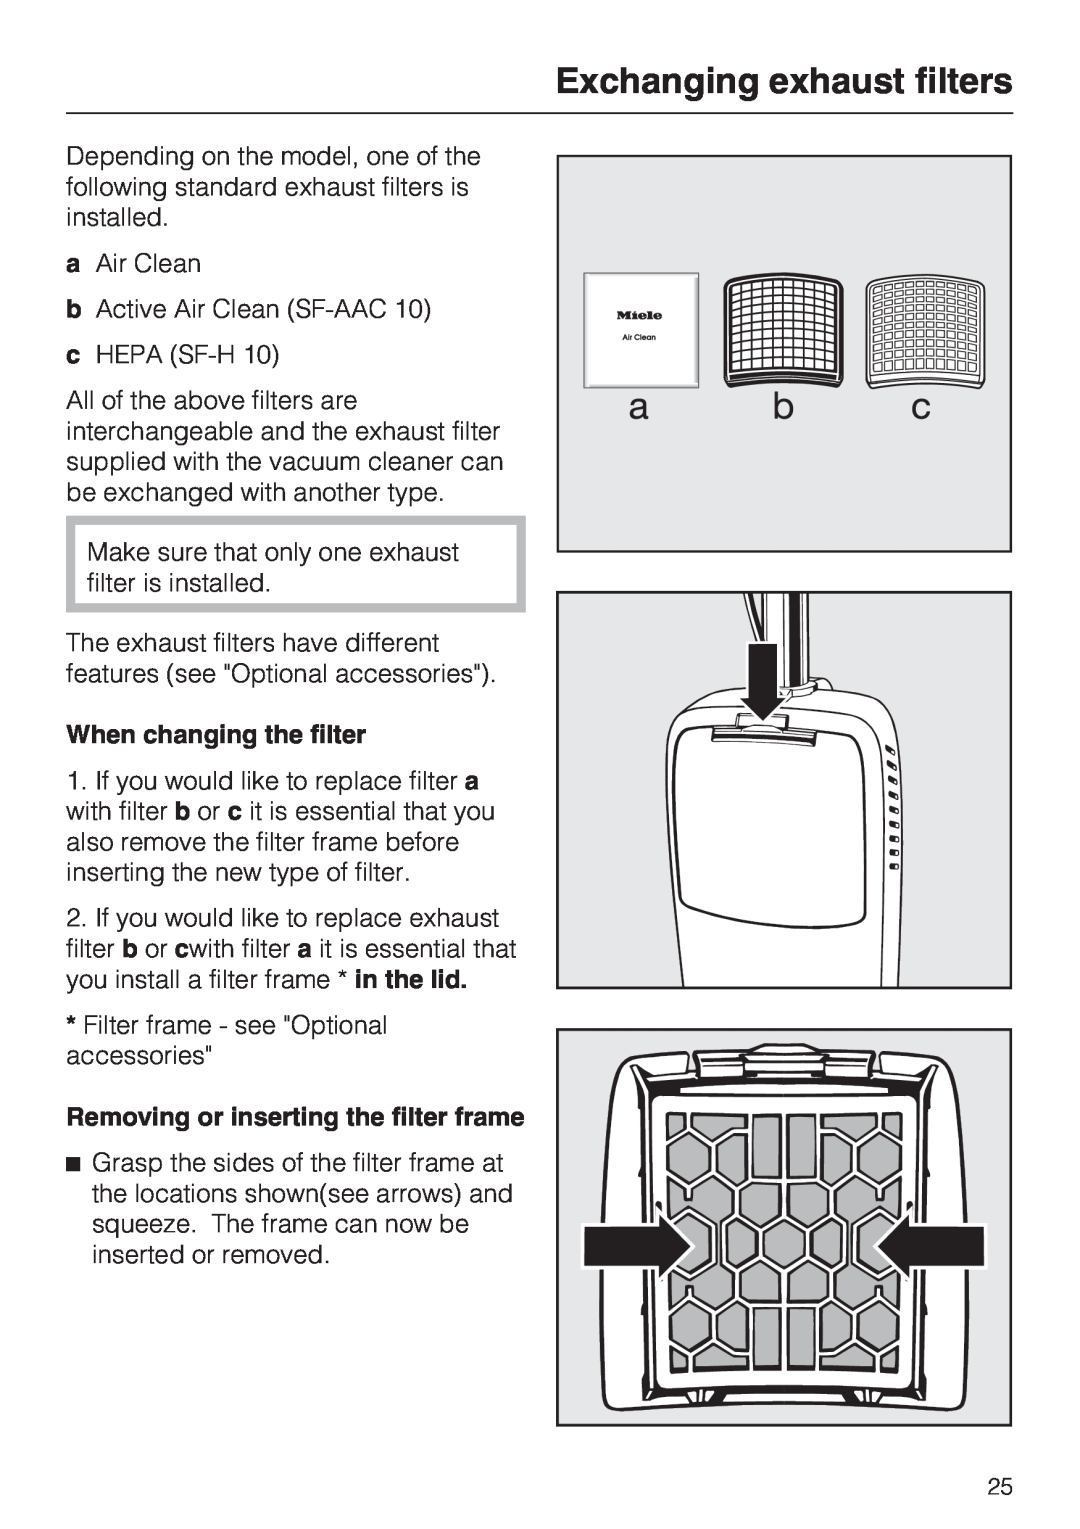 Miele S 190 manual Exchanging exhaust filters, When changing the filter, Removing or inserting the filter frame 